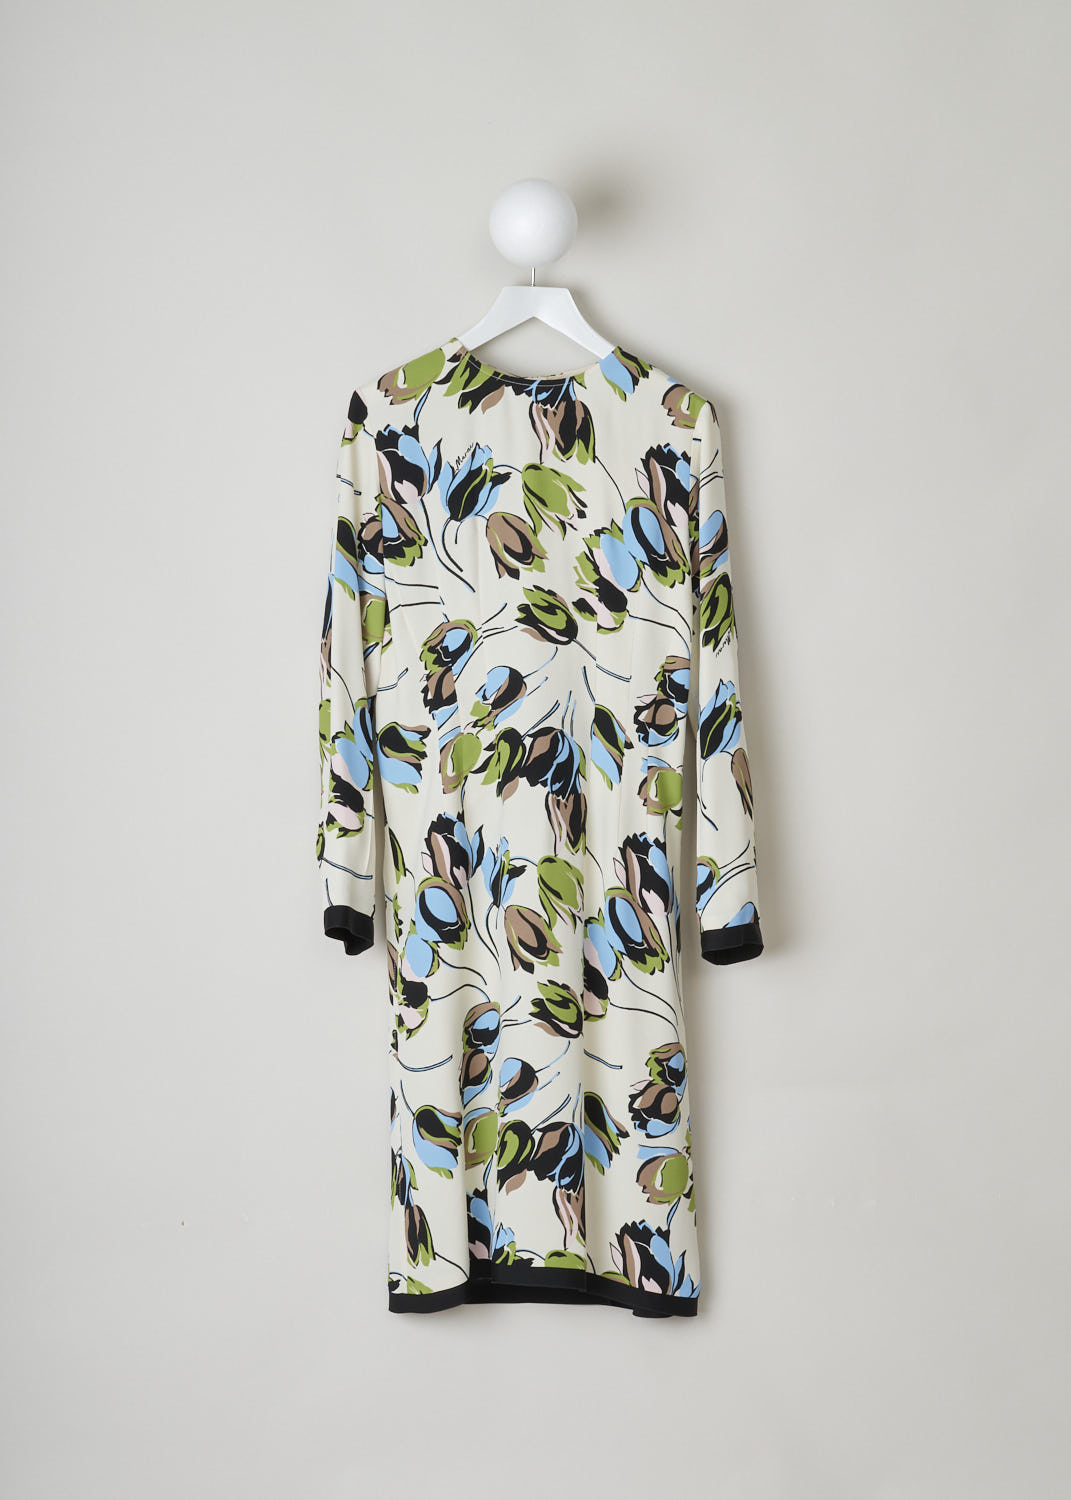 MARNI, CREAM COLORED MIDI DRESS WITH BIG FLORAL PRINT, 
ABMAT93Q00_UTV844_WIW03, Print, Beige, Front, This cream colored midi dress has a floral print in blues and greens. The dress has a round neckline. The closure function on the dress is a concealed centre zip inn the back. Also in the back, a centre slit can be found. The dress has a black satin hemline. 